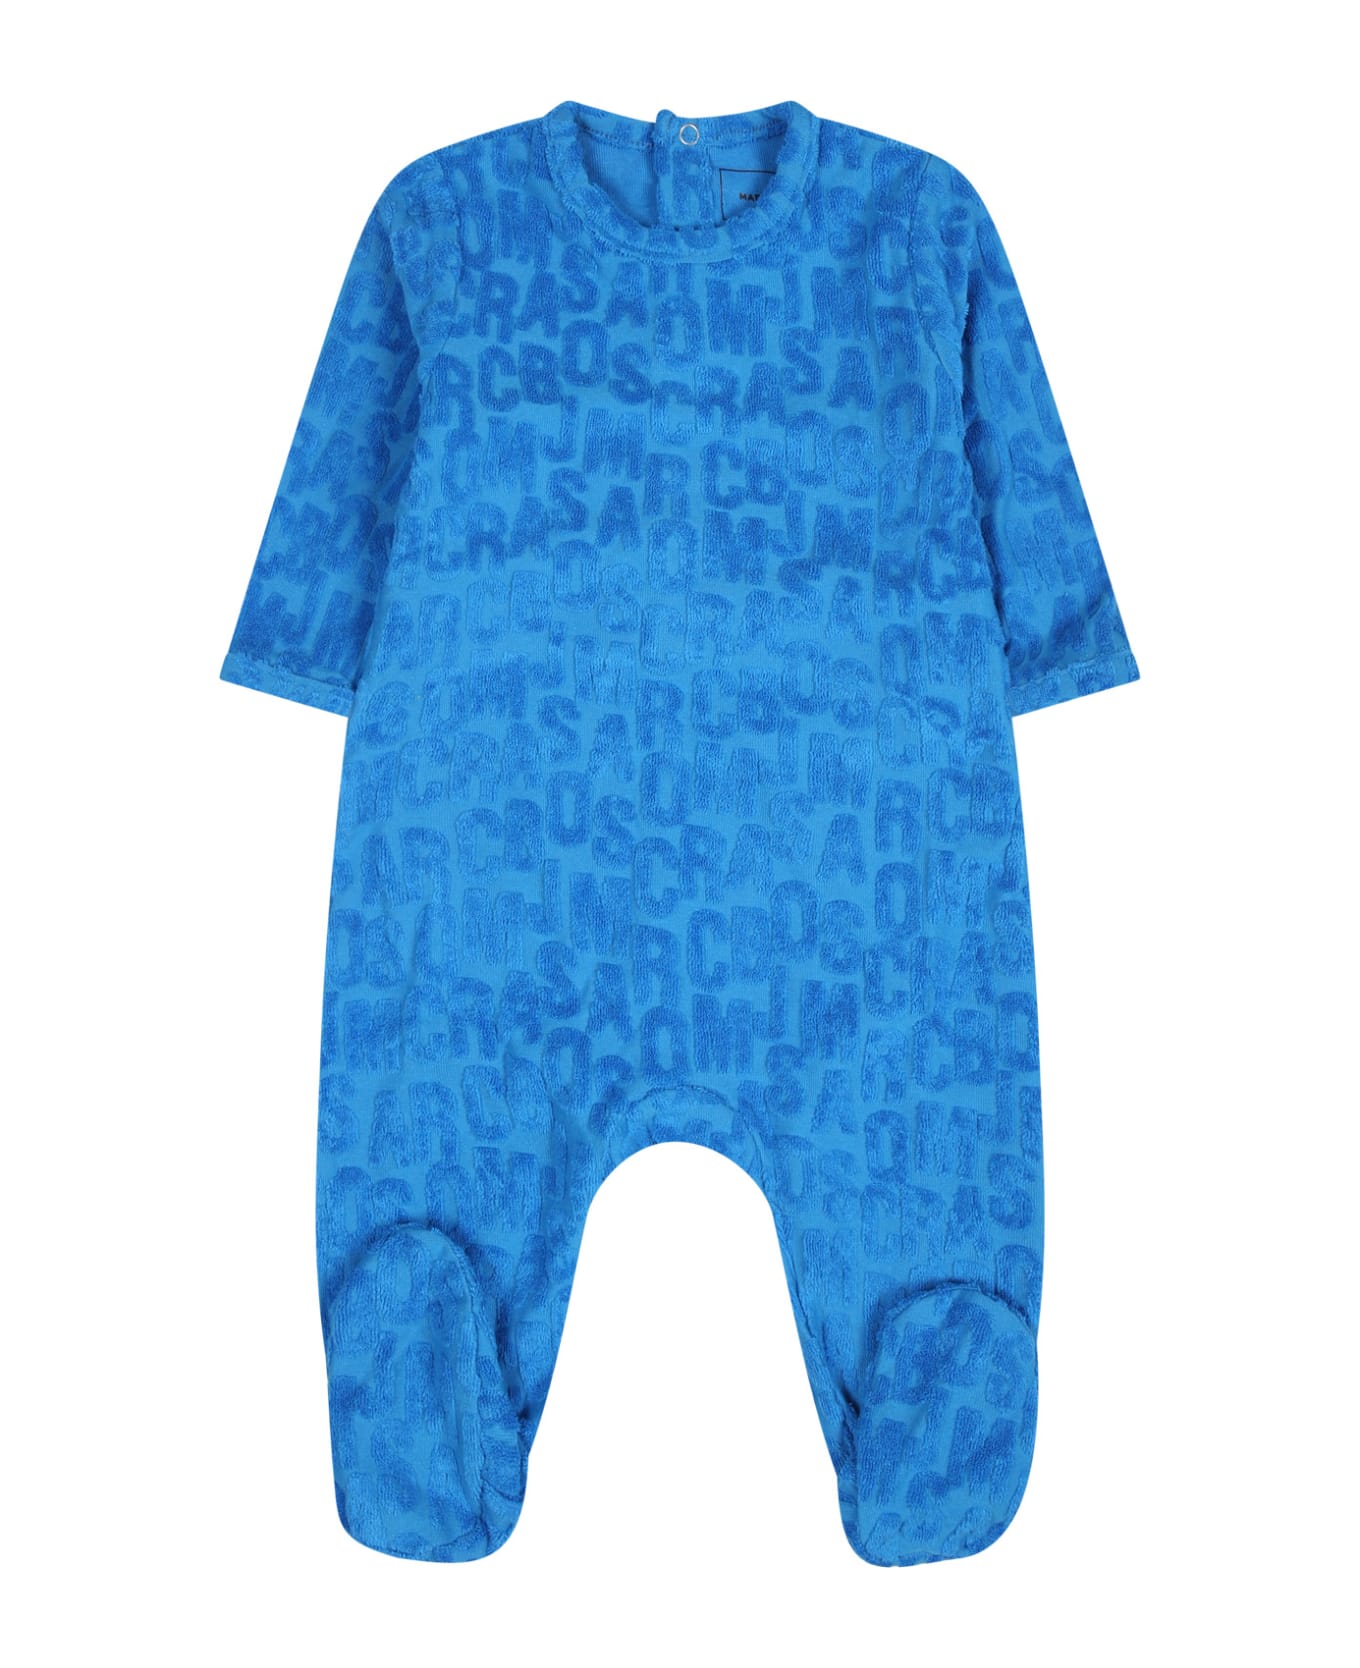 Marc Jacobs Multicolor Set For Baby Boy With Logo - Light Blue